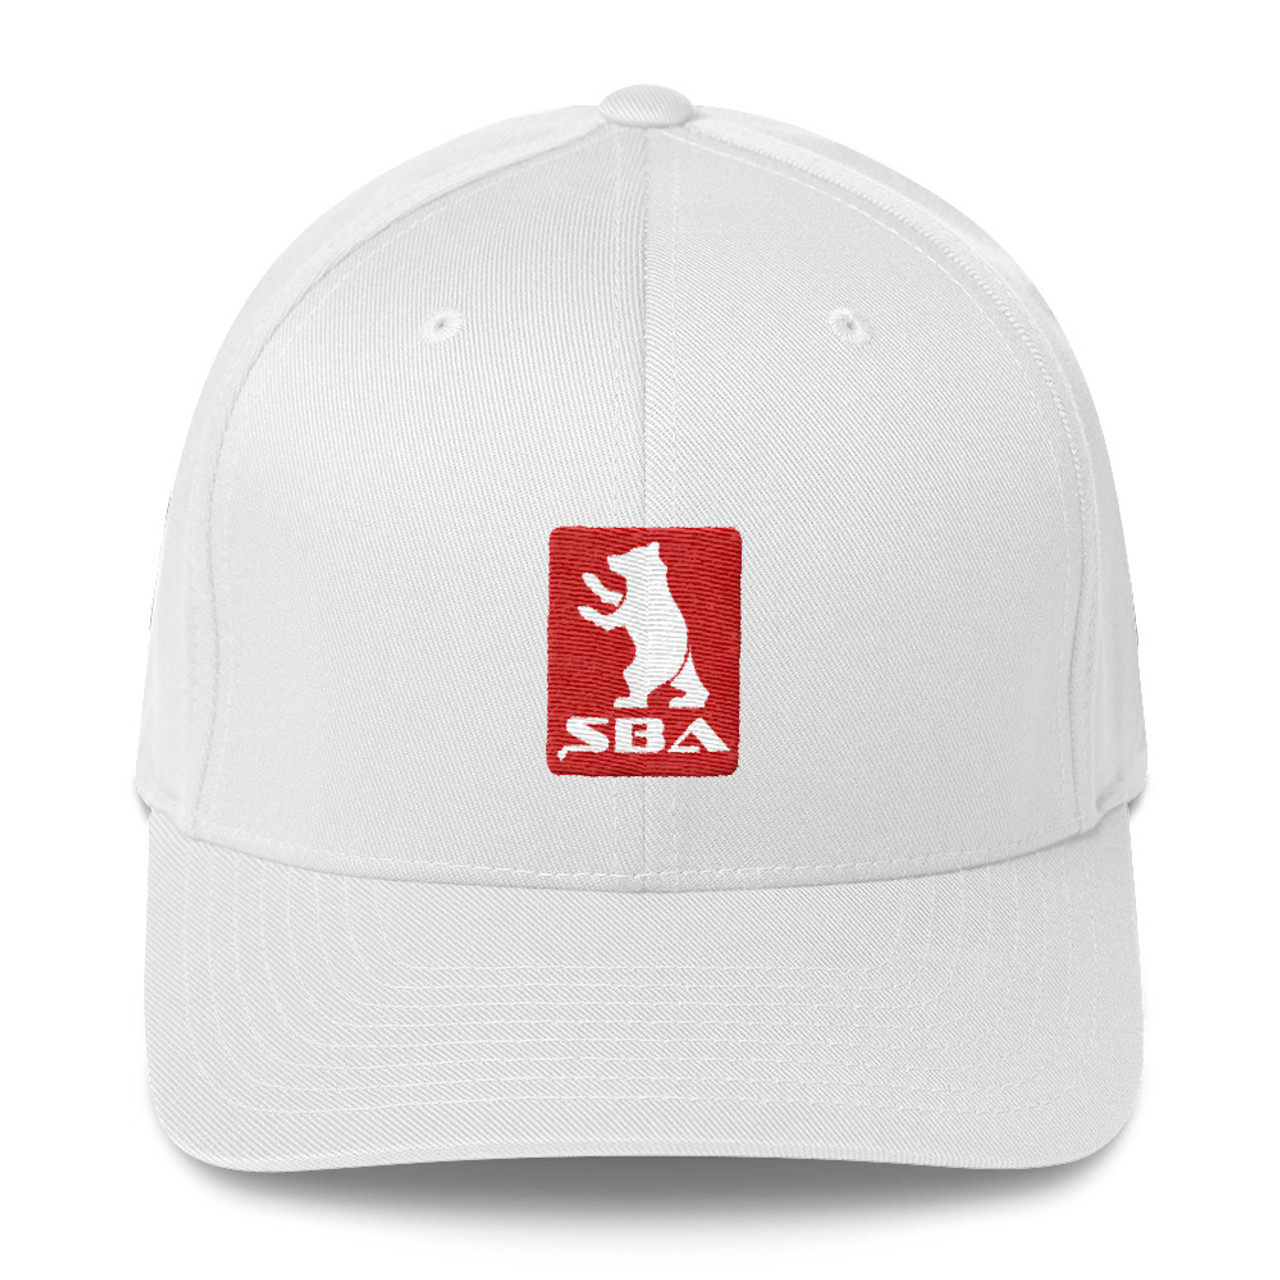 Structured Gear Twill Series - Cap in White Classic 6 Panel SBA